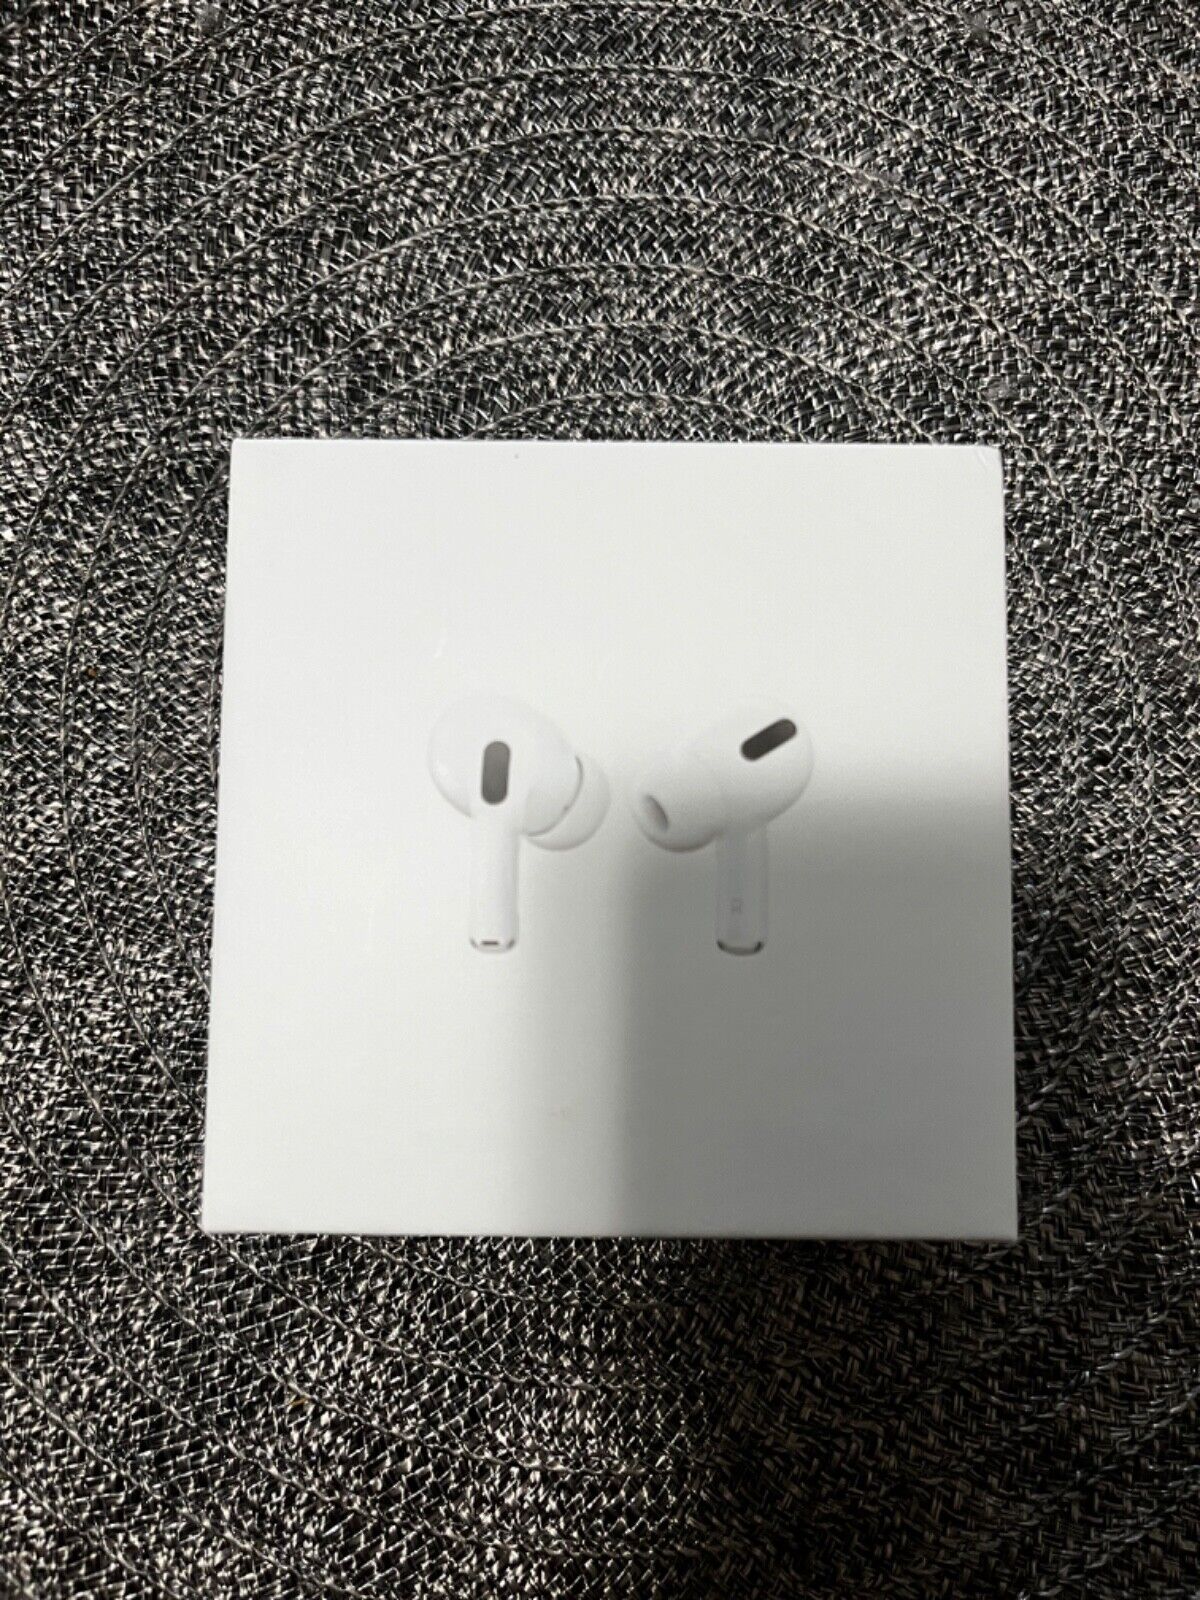 Apple AirPods Pro 2nd Generation Wireless Earbud MagSafe USB-C Charging Case